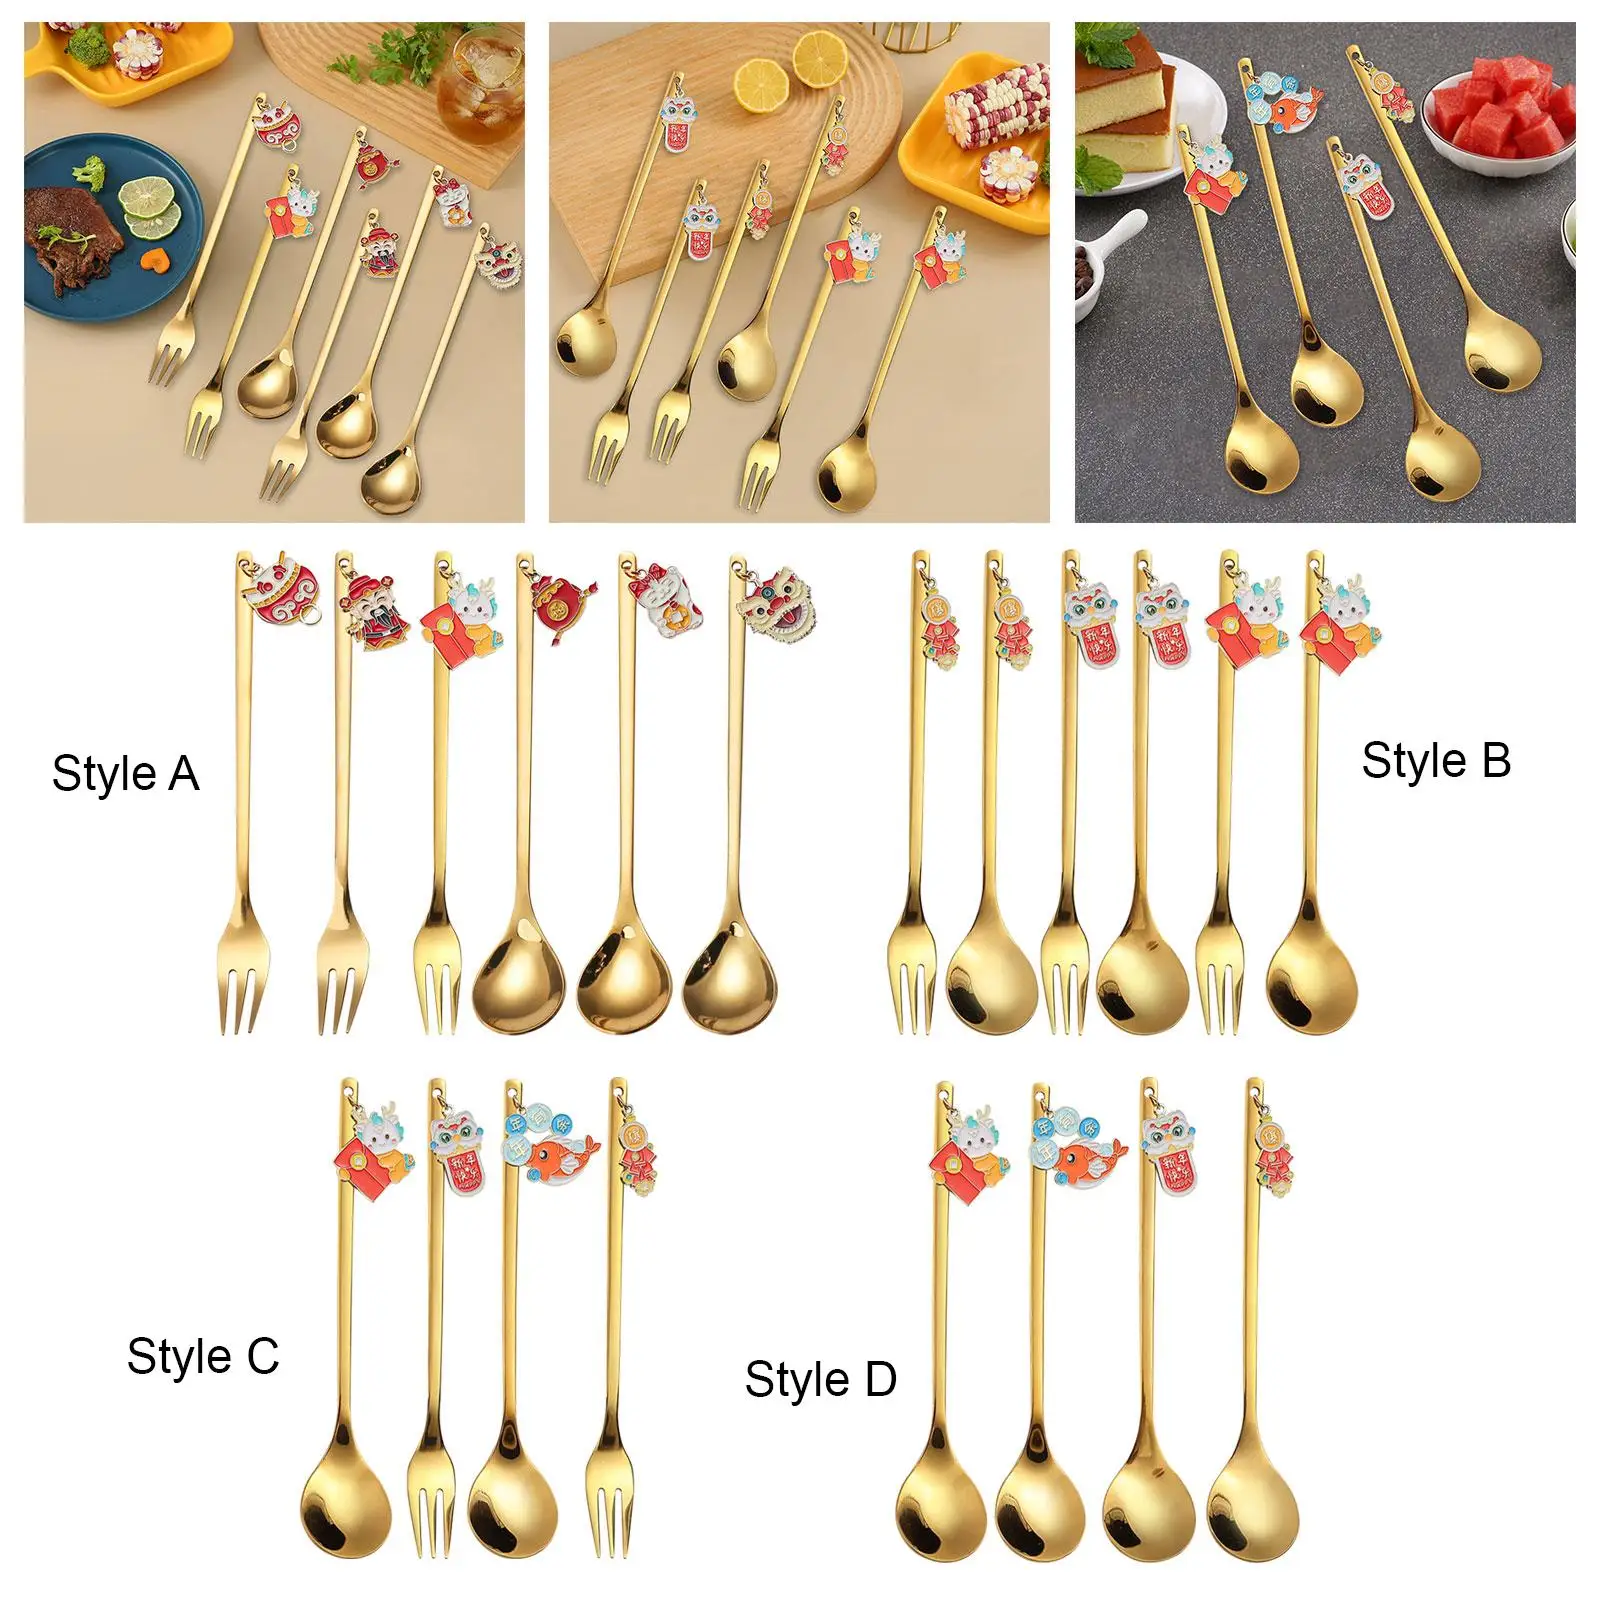 Party Cutlery Set Spoons and Forks Dinnerware Flatware Set Dessert Spoon for Holiday Gatherings Housewarming Birthday Party